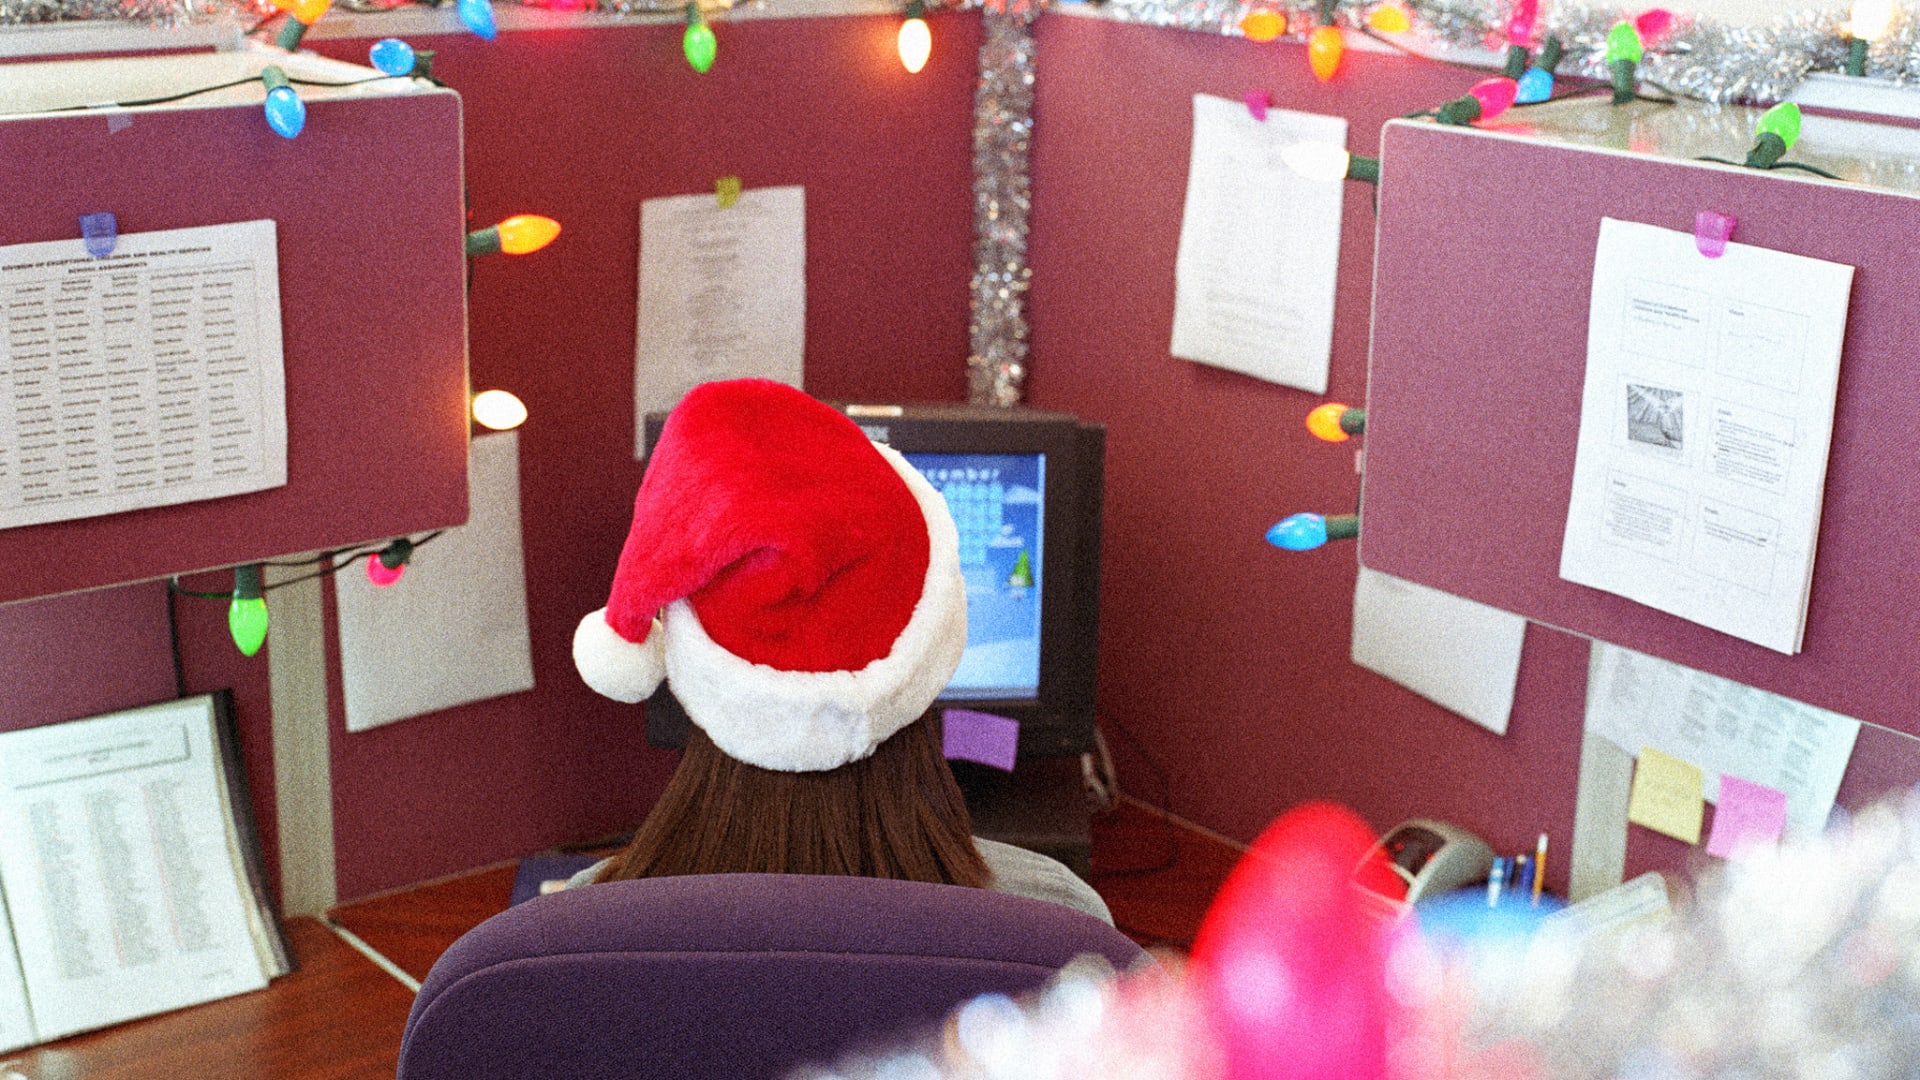 How Managers Can Support Their Team During the Holidays